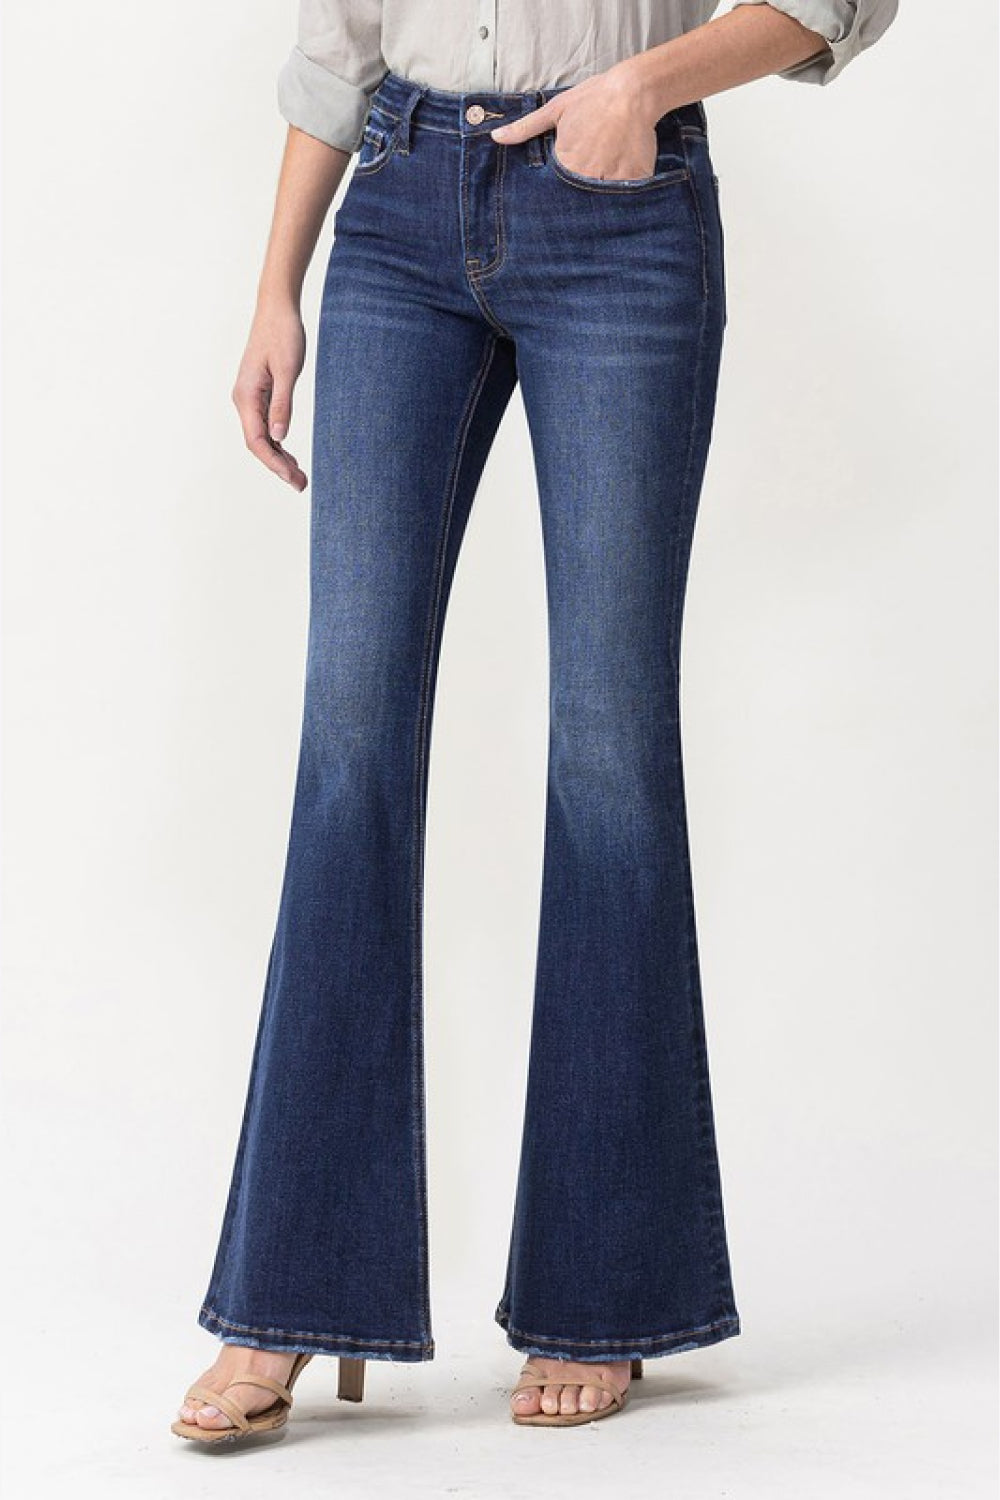 DARK - Lovervet Full Size Joanna Midrise Flare Jeans - Ships from The US - womens jeans at TFC&H Co.